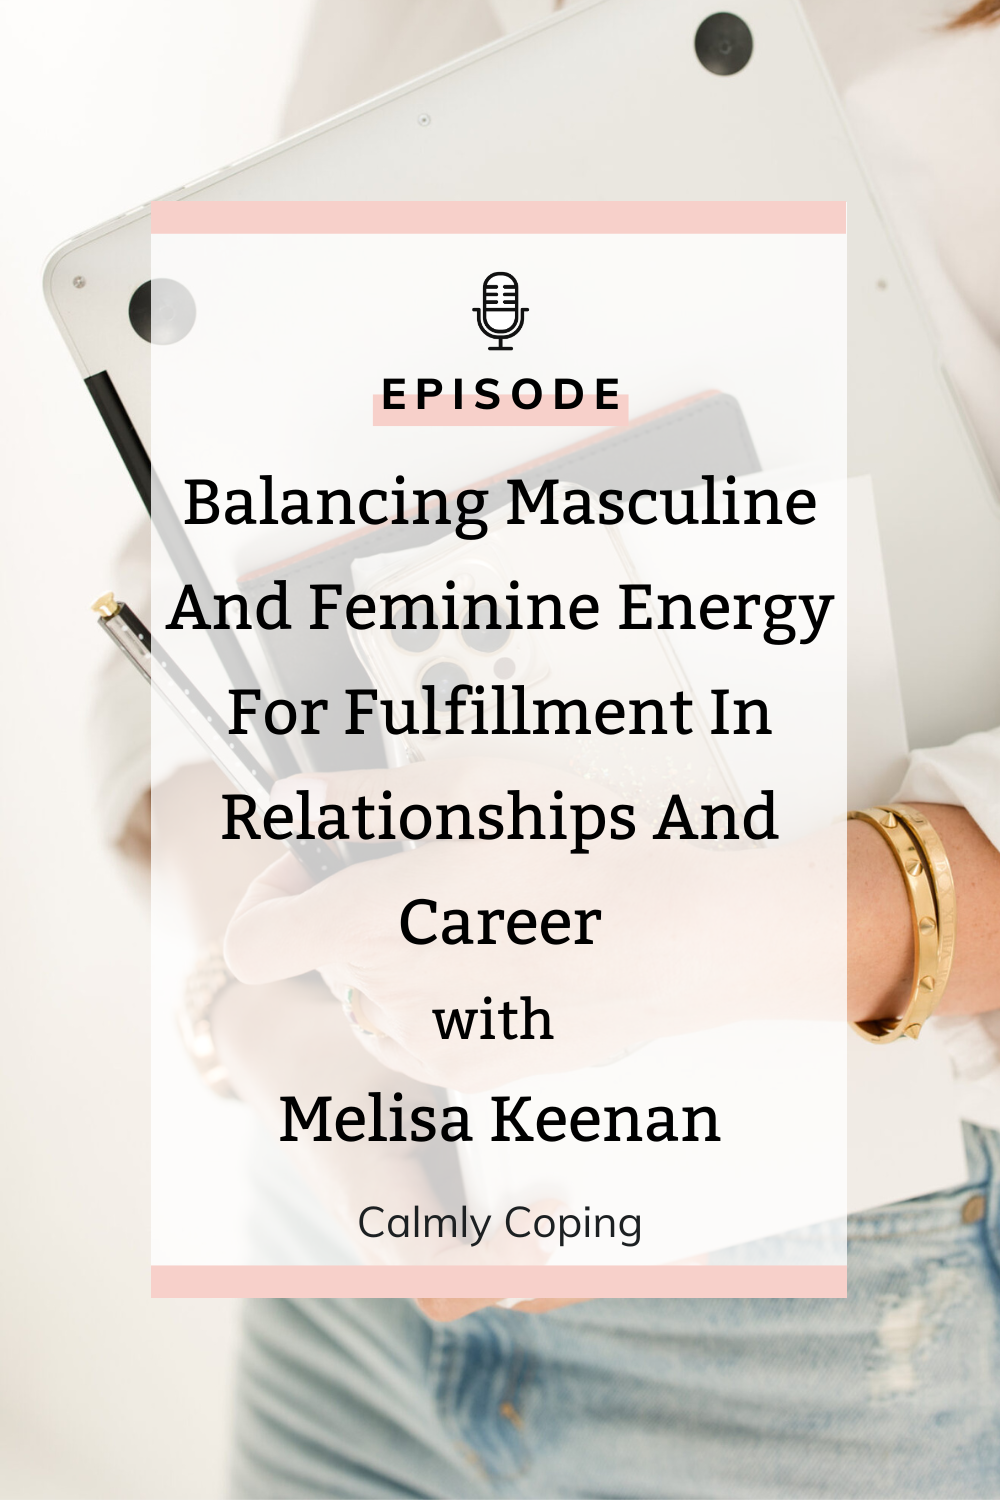 Balancing Masculine and Feminine Energy for Fulfillment in Relationships and Career with Melisa Keenan